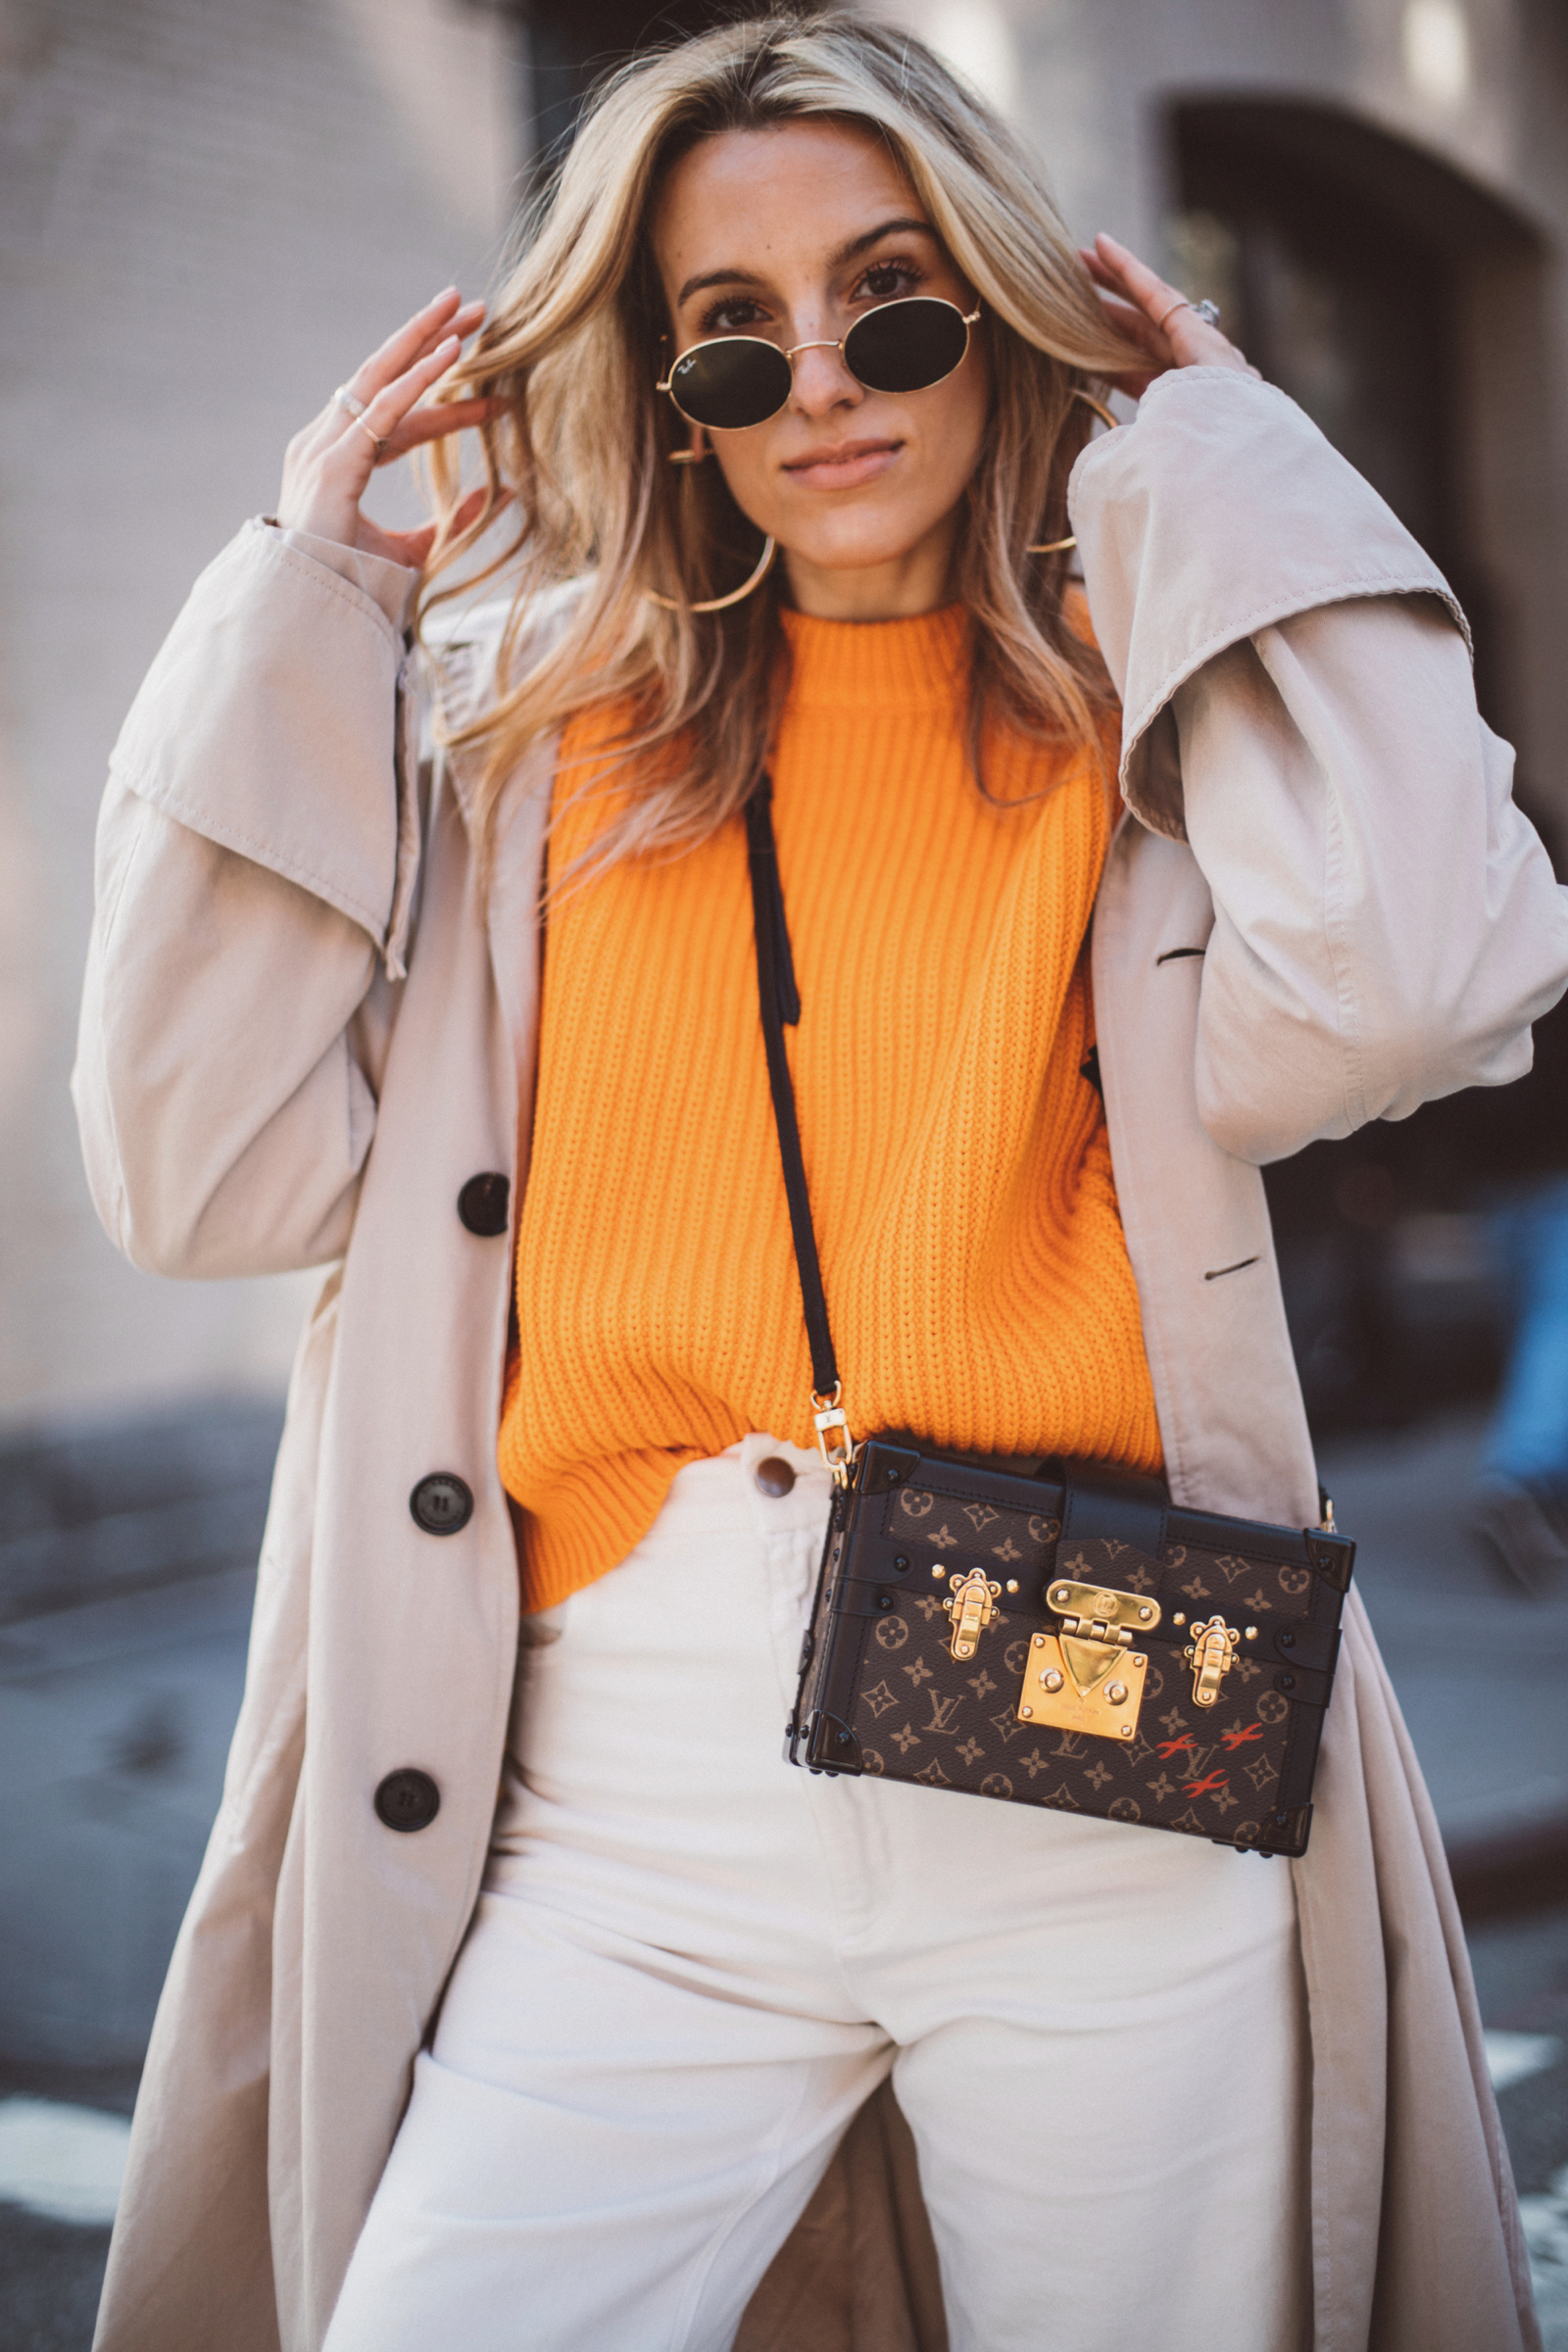 Orange sweater, Neutrals, trends, New York Fashion Week trends, Color, White boots